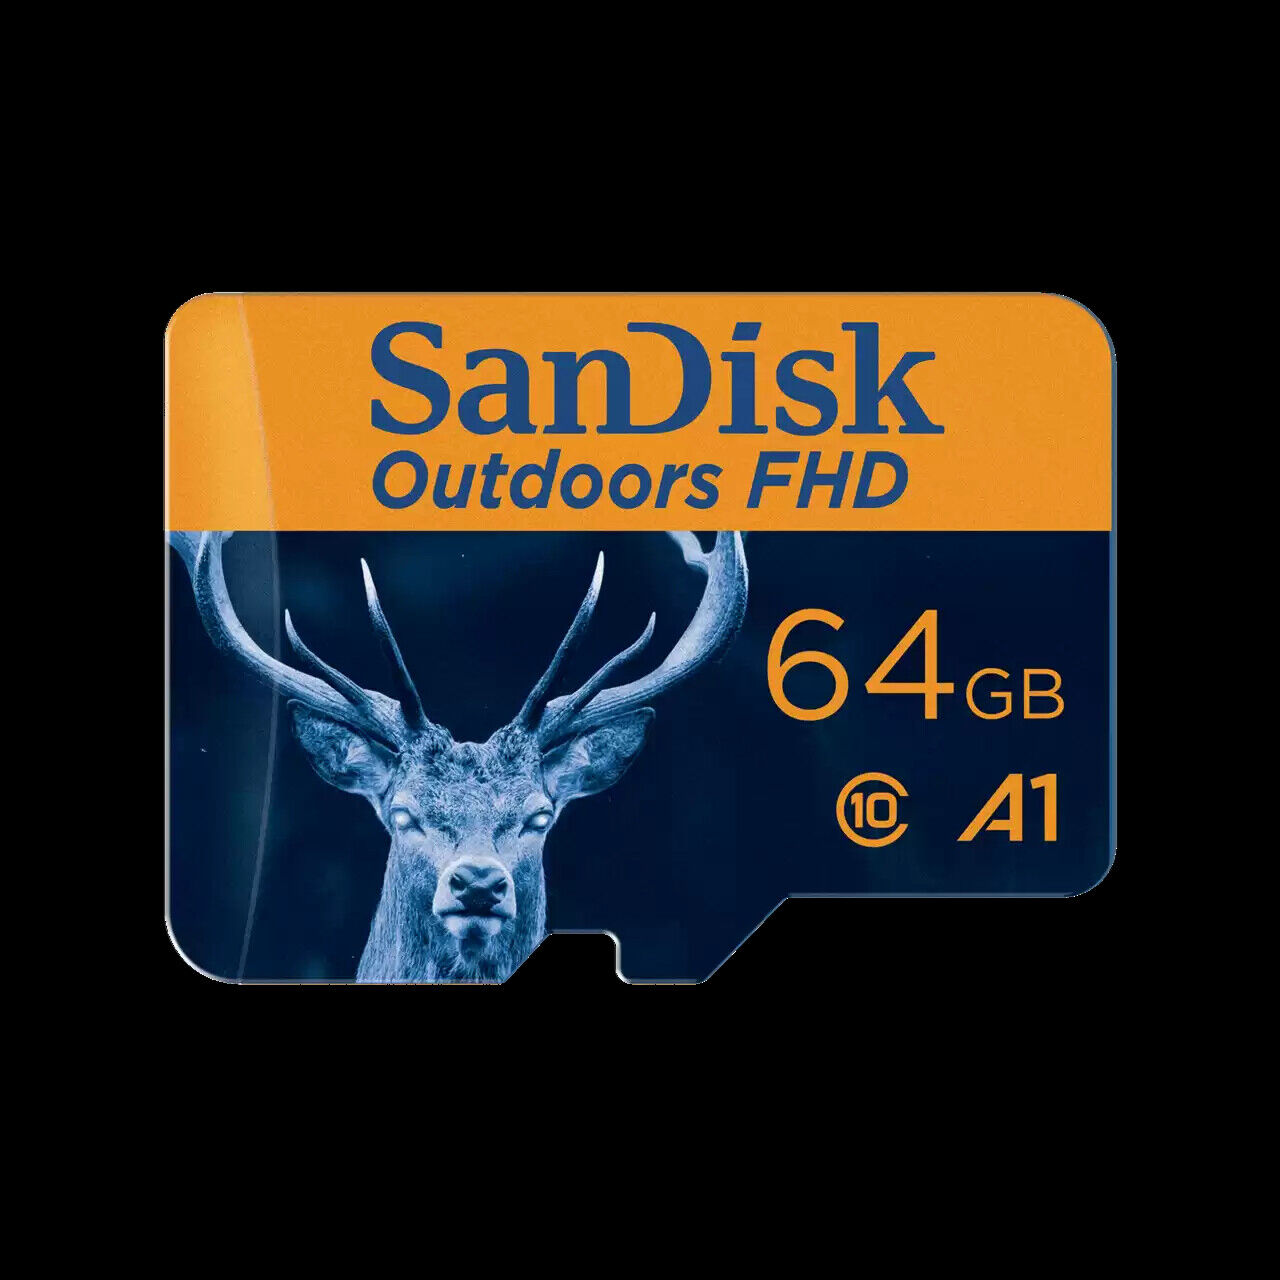 SanDisk 64GB microSDXC UHS-I Card with Adapter, 2-Pack - SDSQUNR-064G-GN6VT